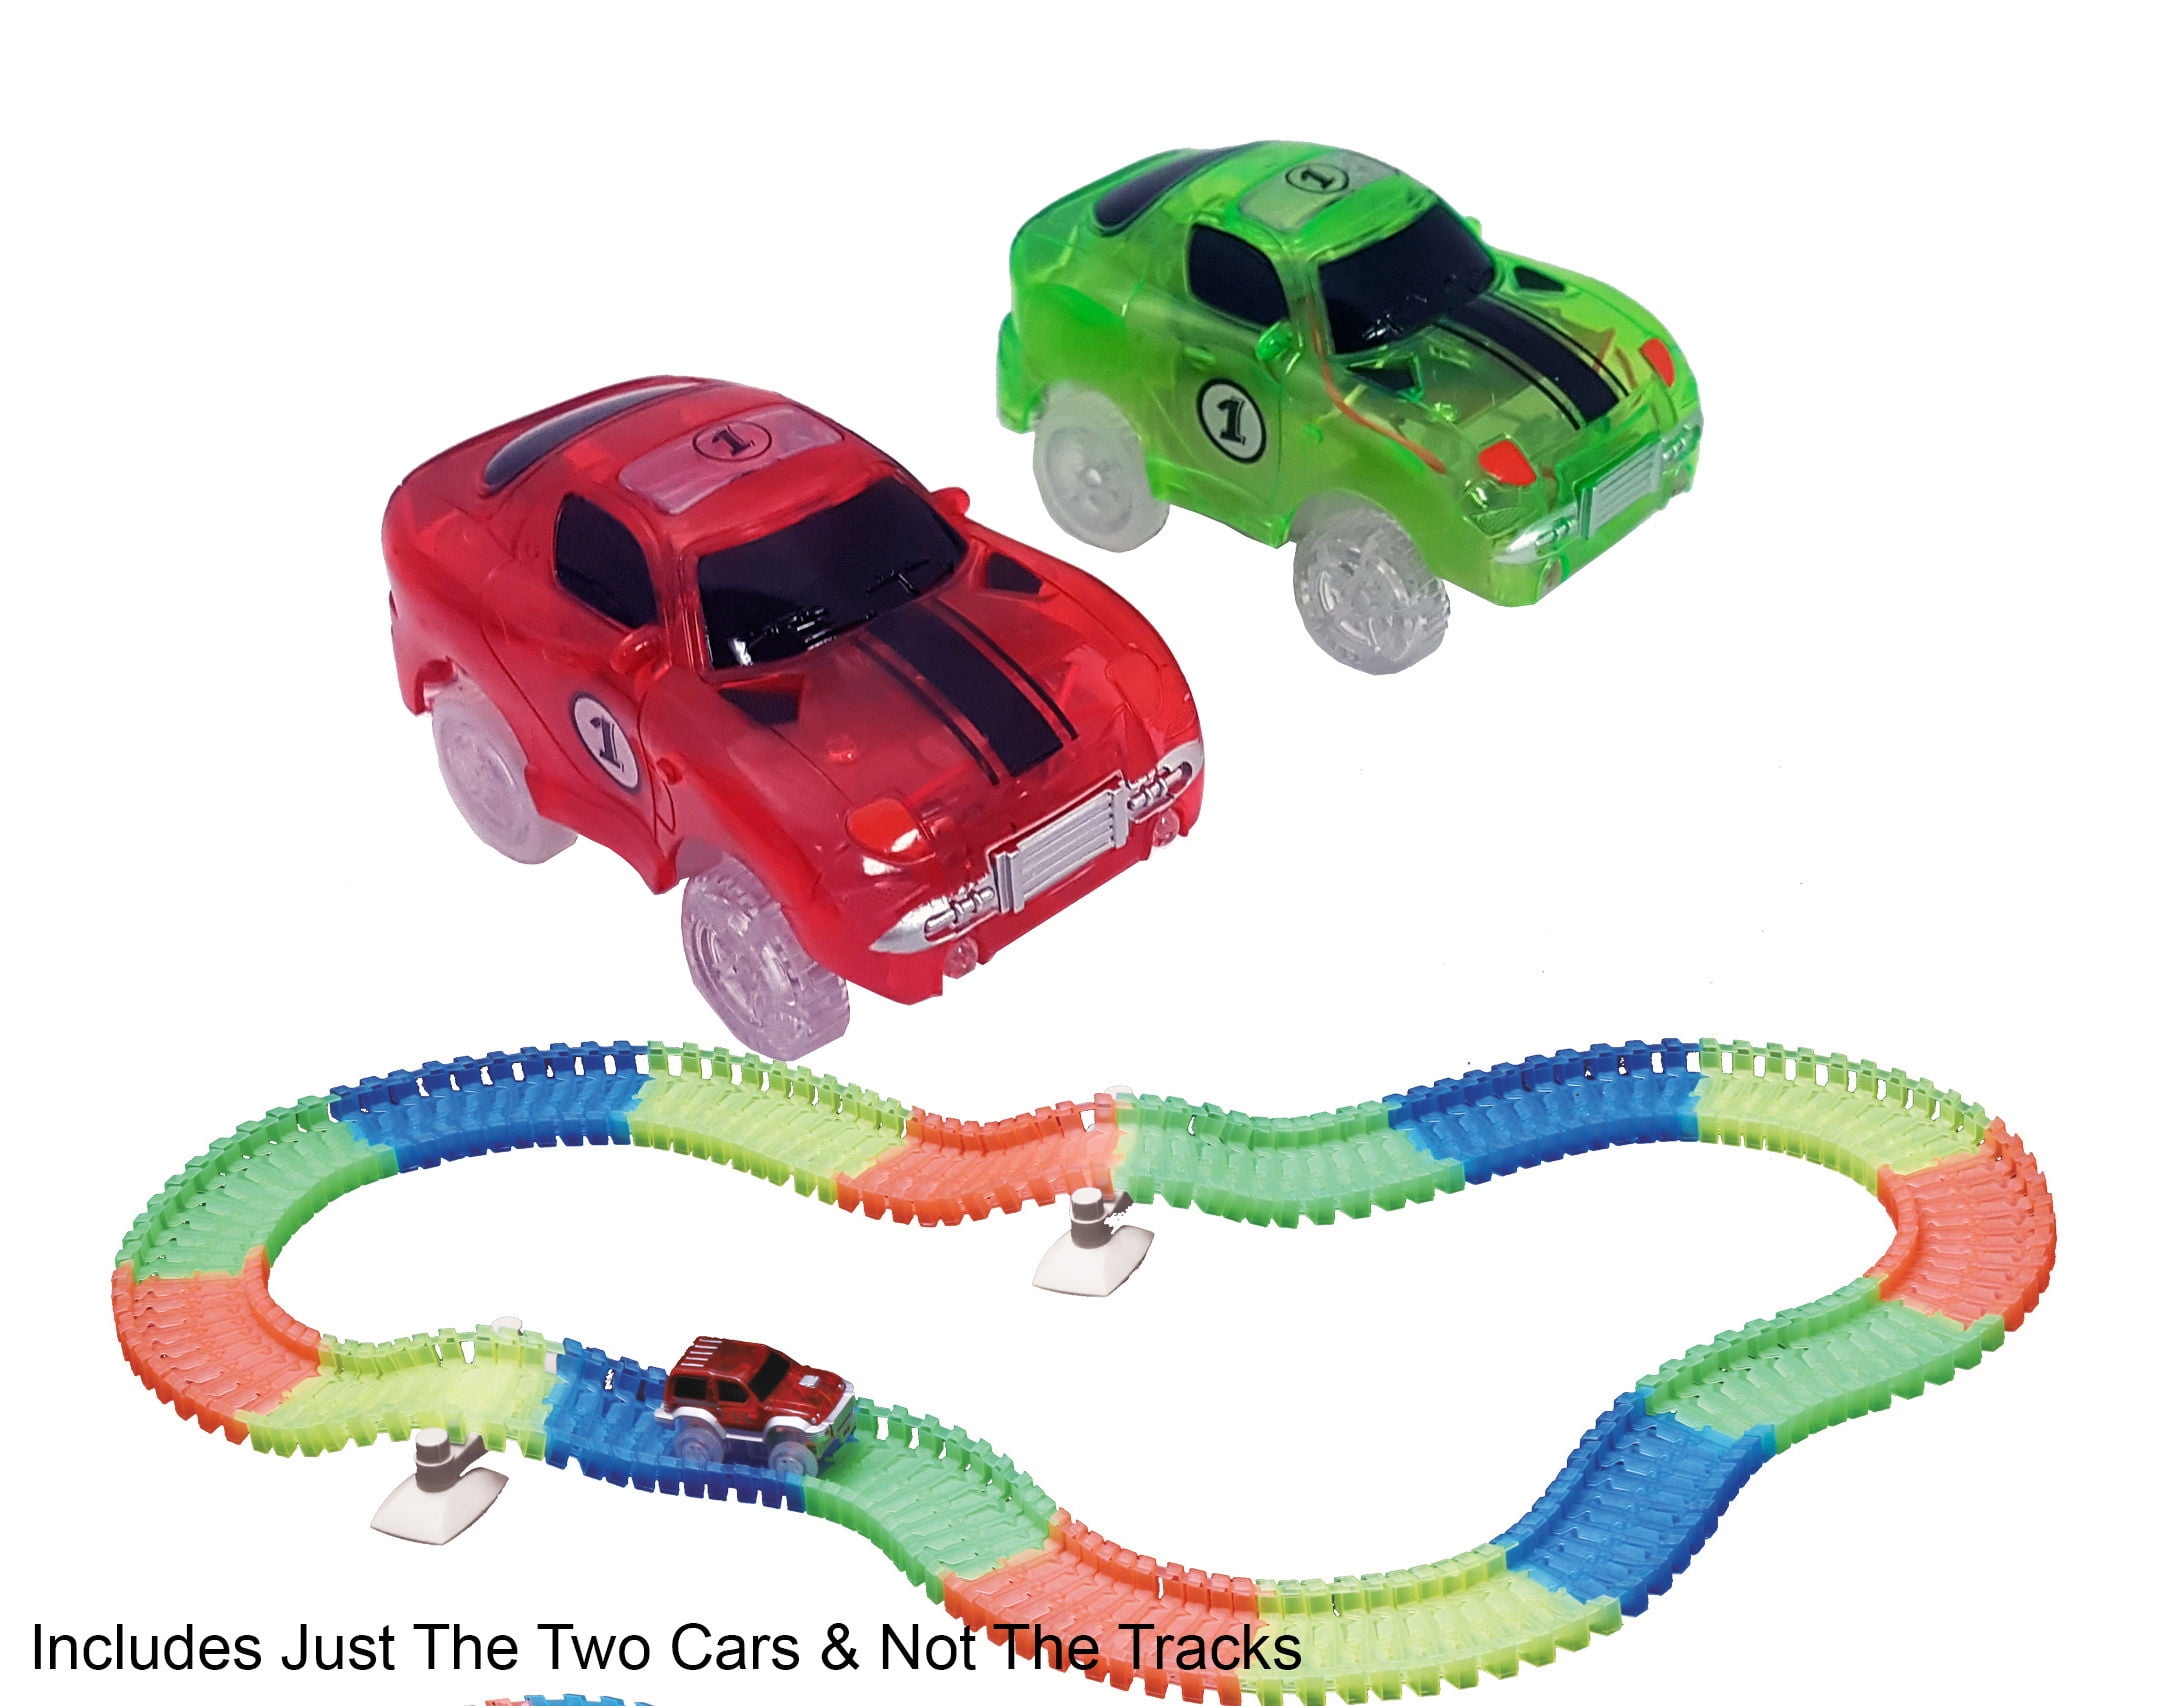 Amazing Cars for Magi c Track s Glow in the Dark Racetrack Light Up Race Cars · 